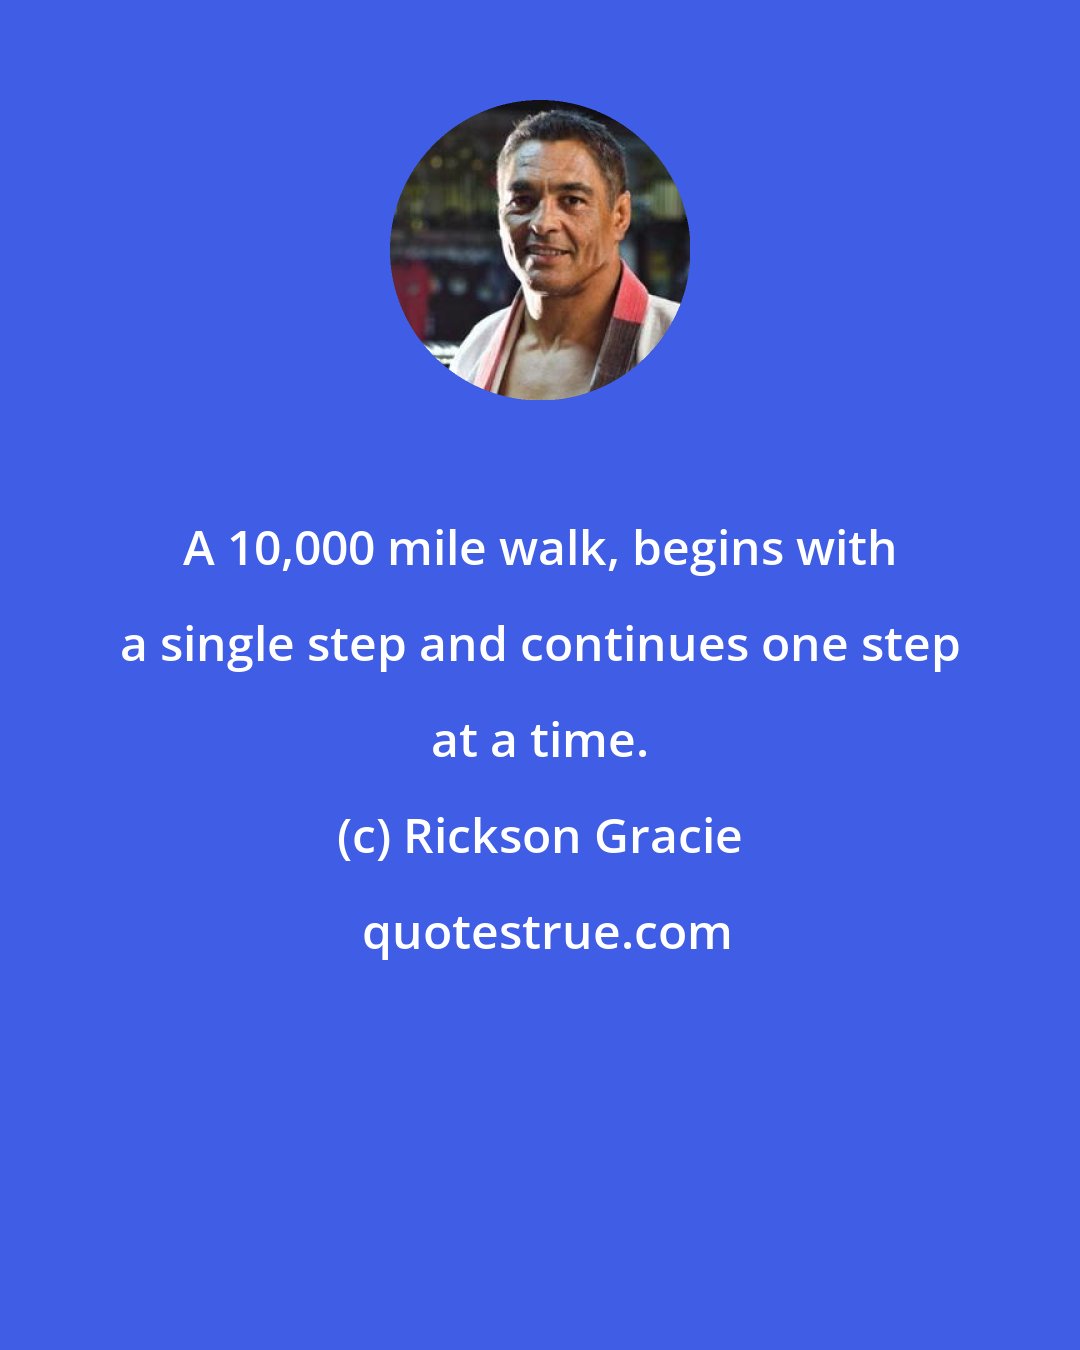 Rickson Gracie: A 10,000 mile walk, begins with a single step and continues one step at a time.